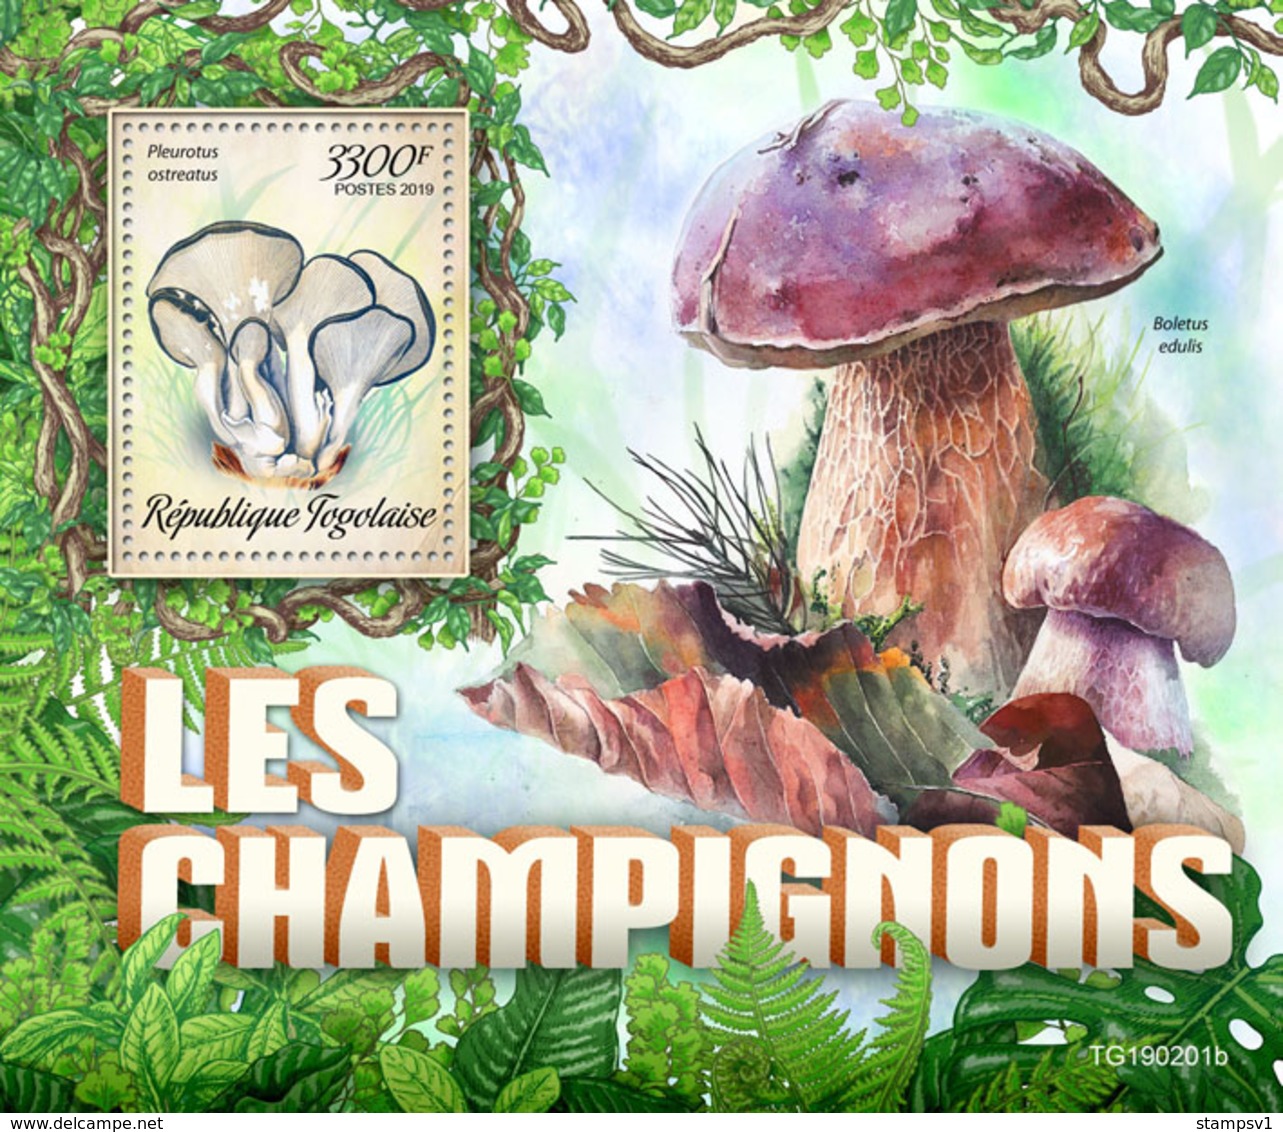 Togo.  2019 Mushrooms. (0201b)  OFFICIAL ISSUE - Funghi